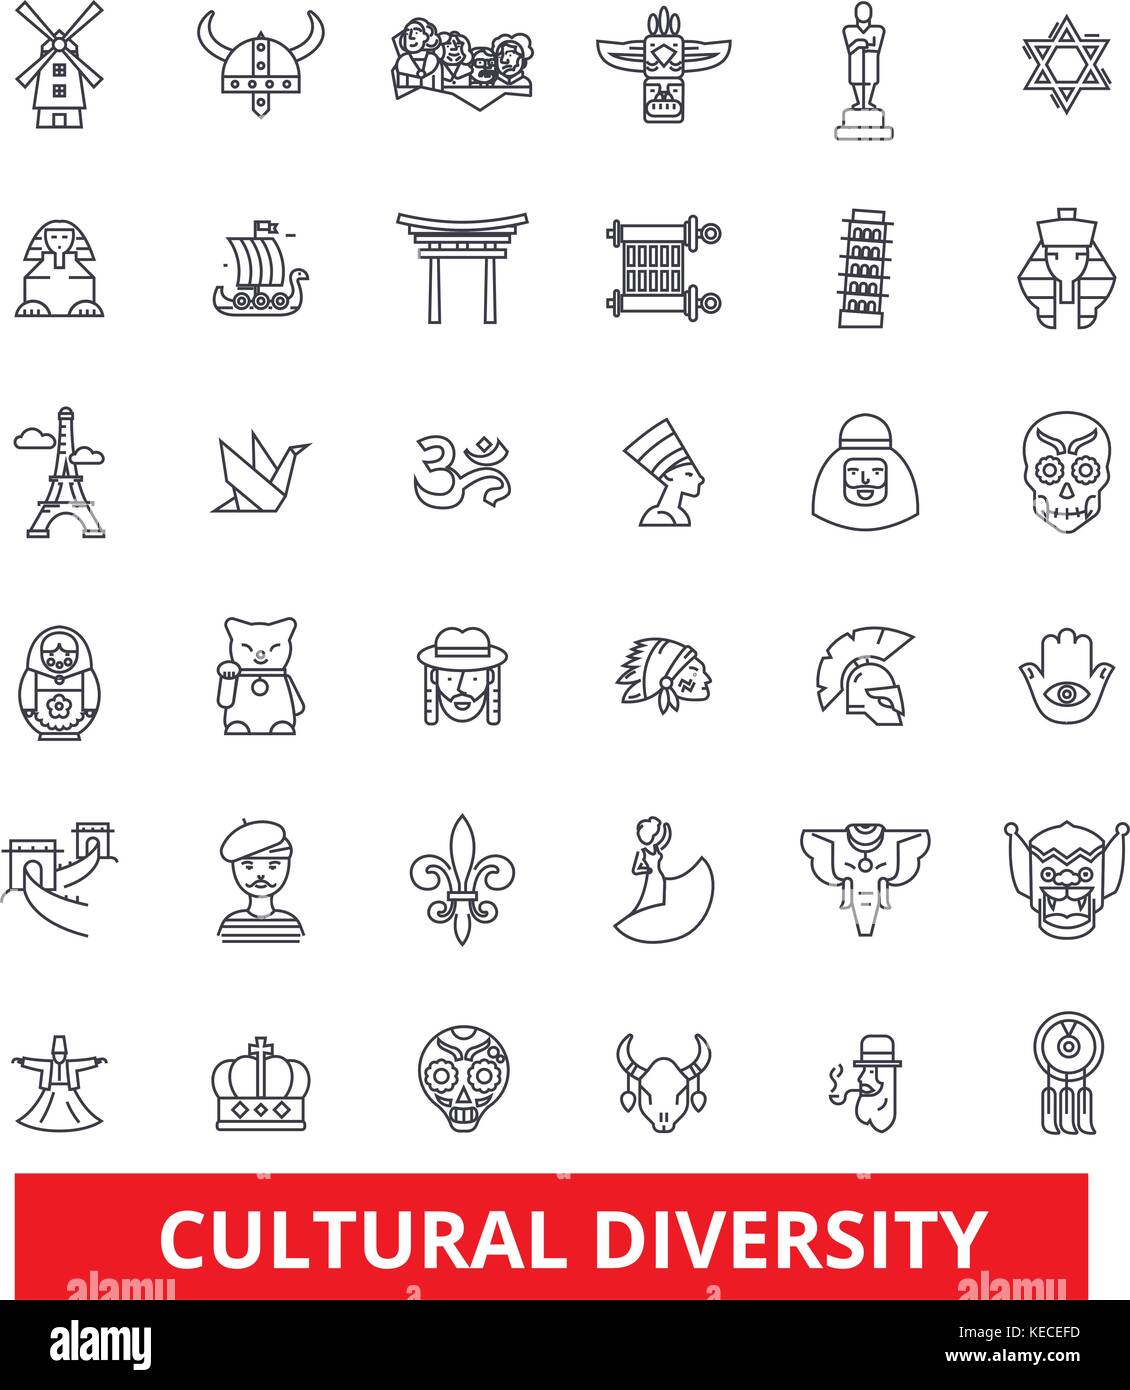 Cultural diversity, international, enthnic, multicultural, tolerance, peace line icons. Editable strokes. Flat design vector illustration symbol concept. Linear signs isolated on white background Stock Vector